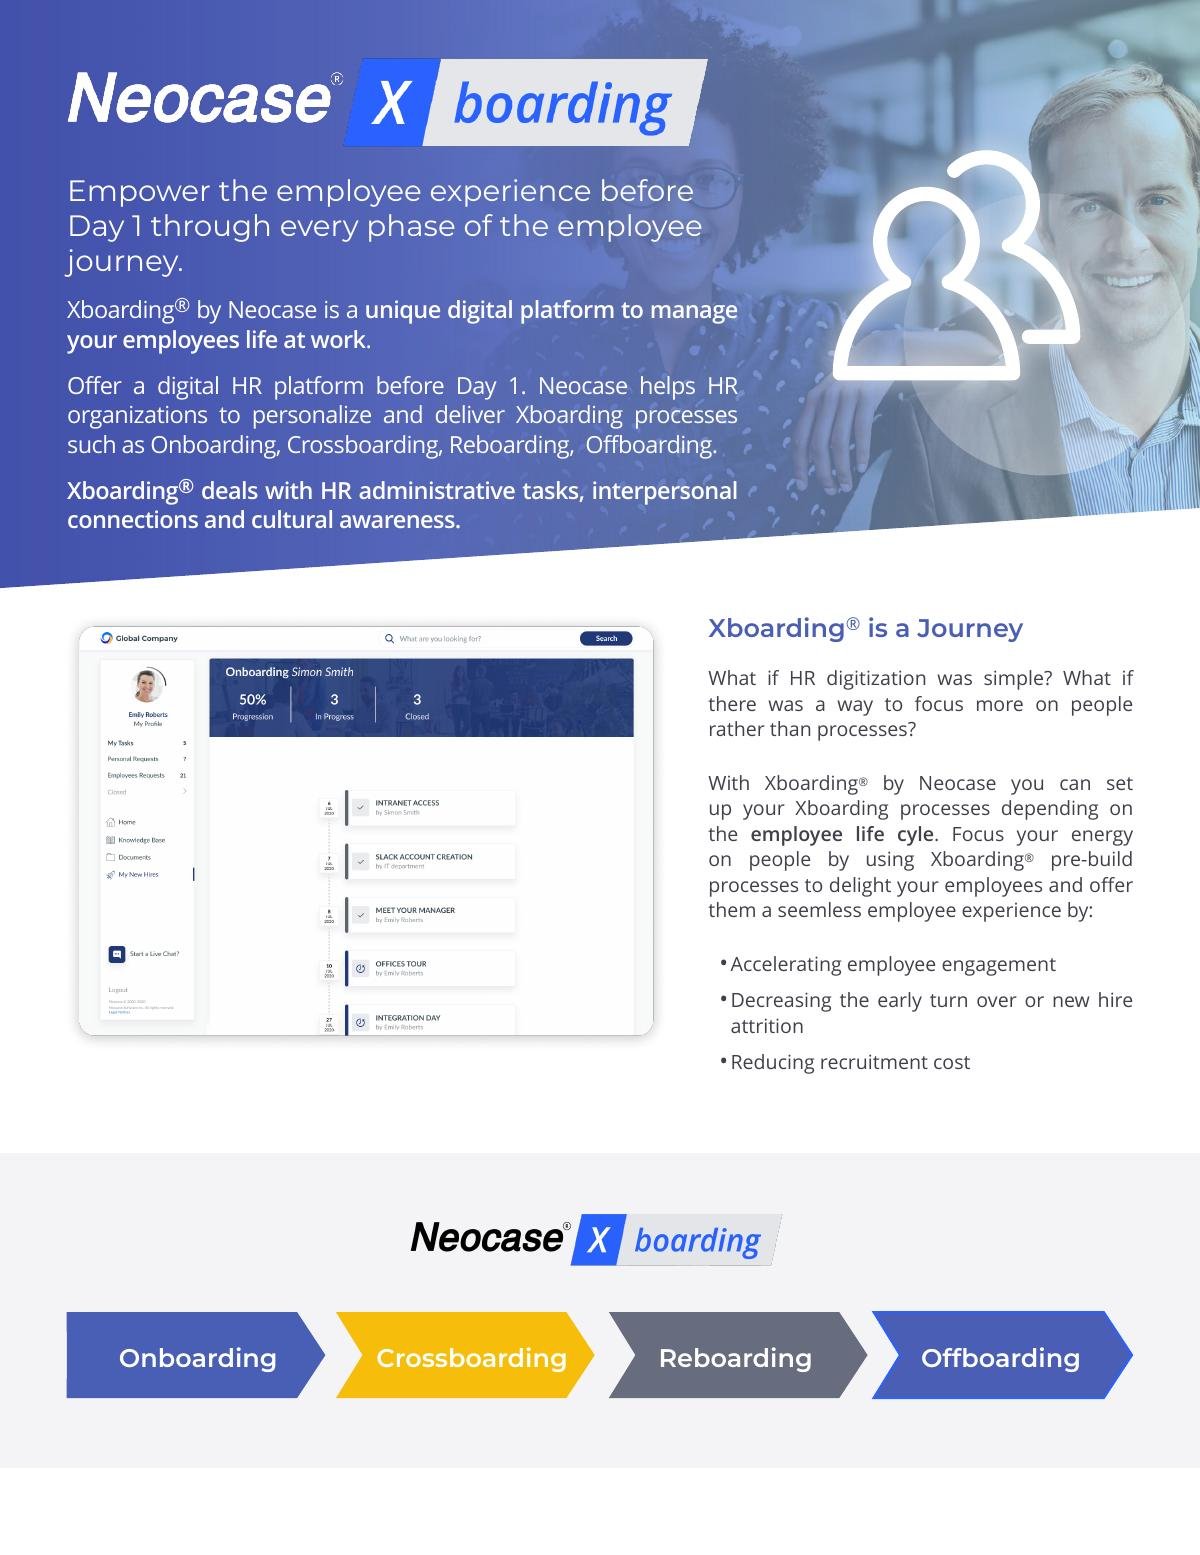 Xboarding with Neocase: Manage the Employee Life Cycle